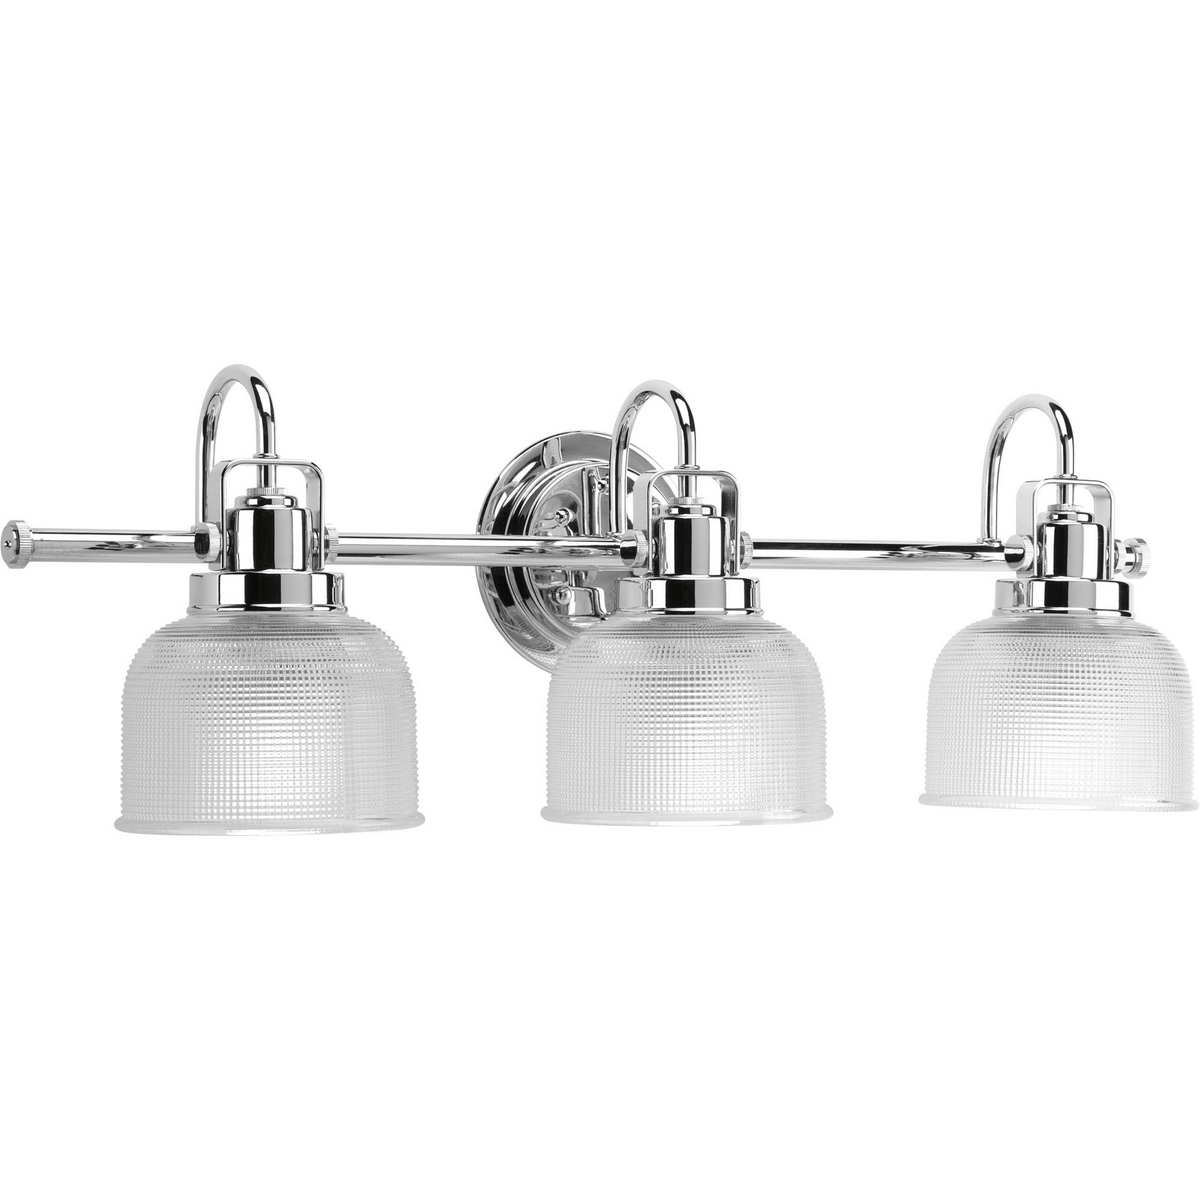 Archie is a standout in any room and provides a fun and fashionable way to light your home. The authentic, prismatic style glass shade diffuses light to provide functional and stylish illumination. Finely crafted strap and knob details are conveyed by the Polished Chrome finish. This three-light fixture can be installed with the glass facing up or down to suit your preference.